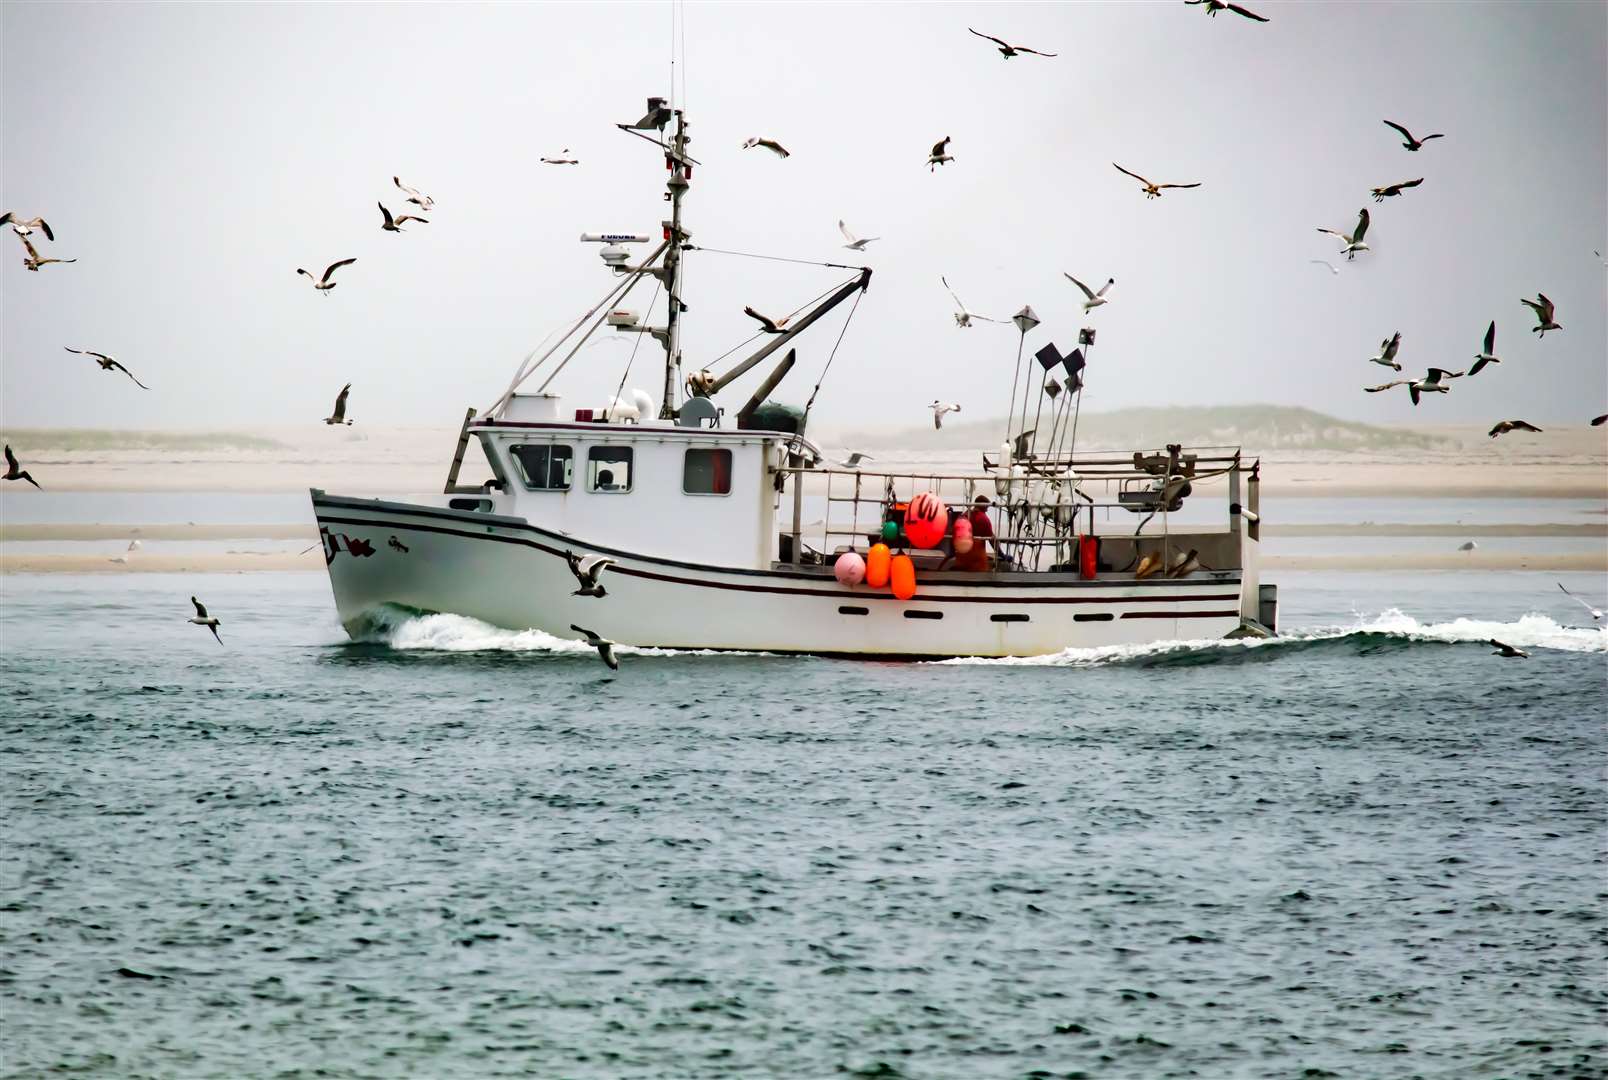 The first tranche of investment in UK fishing has been announced